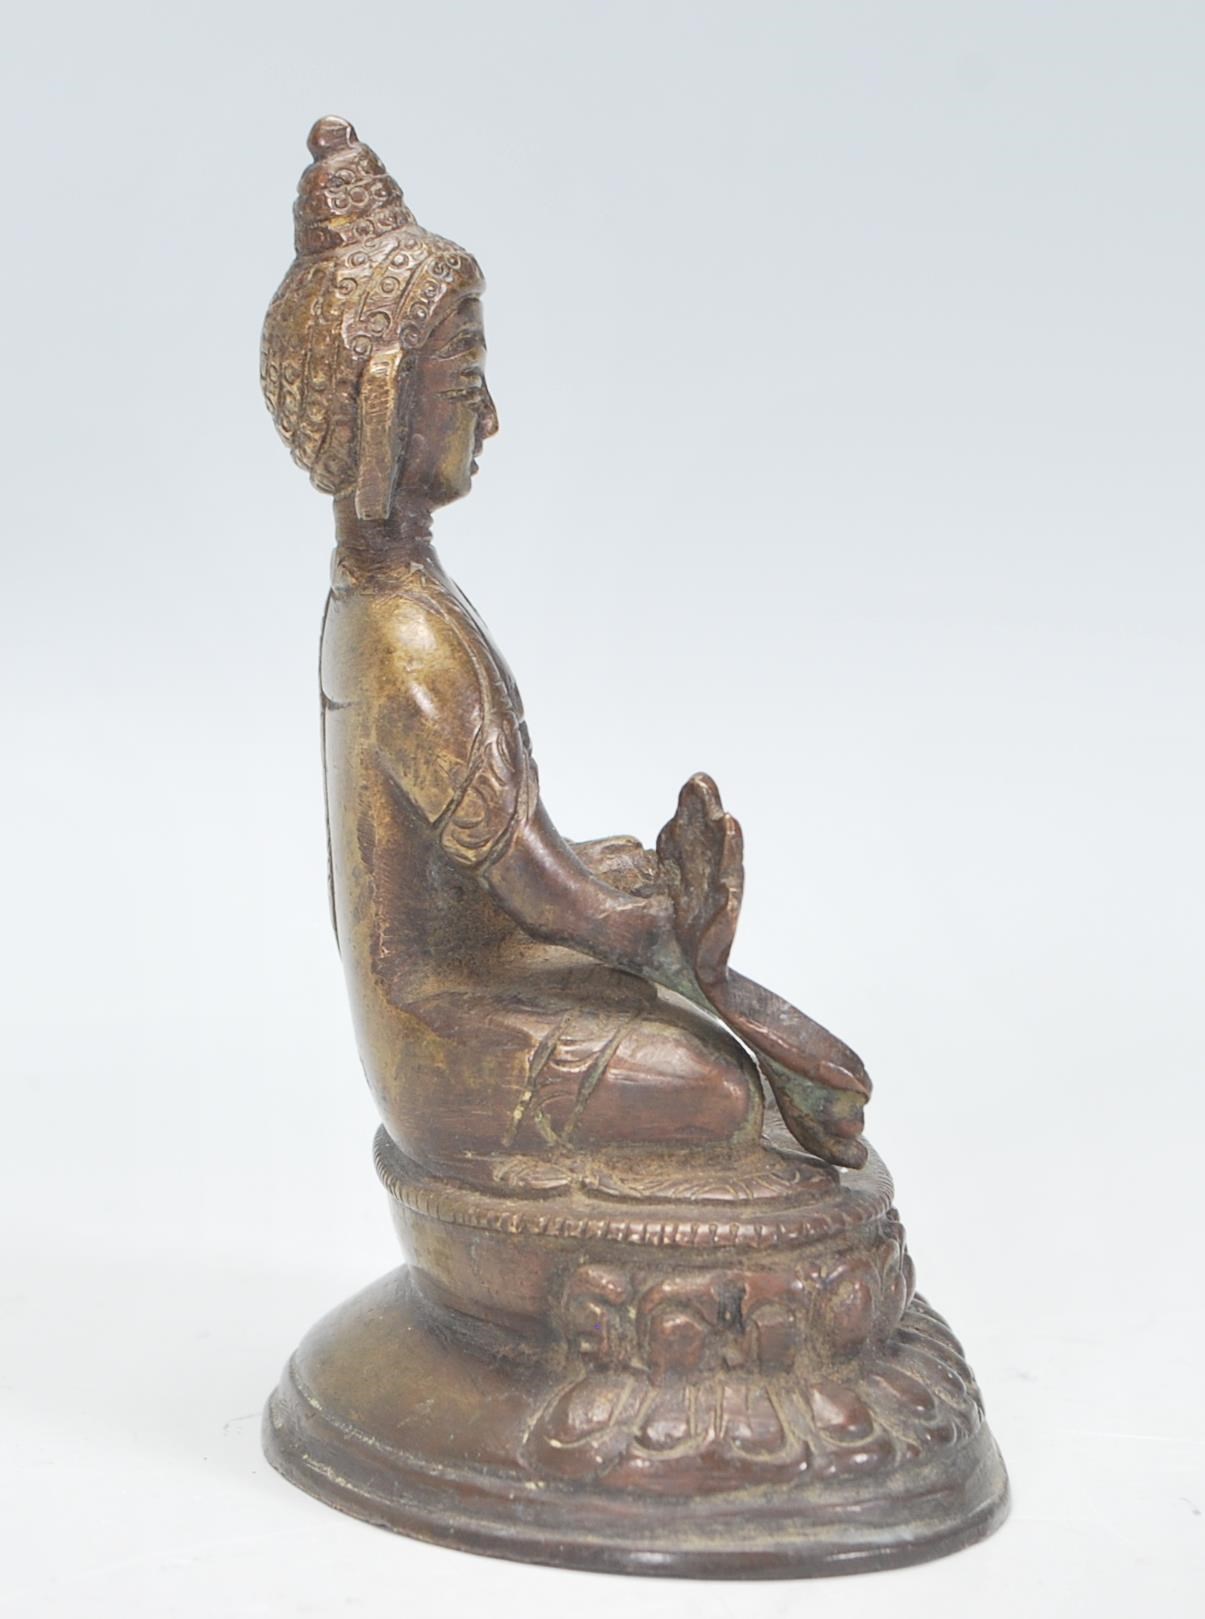 An Indian bronze figurine / ornament in the form of Buddha, modelled in a seated position raised - Image 2 of 6